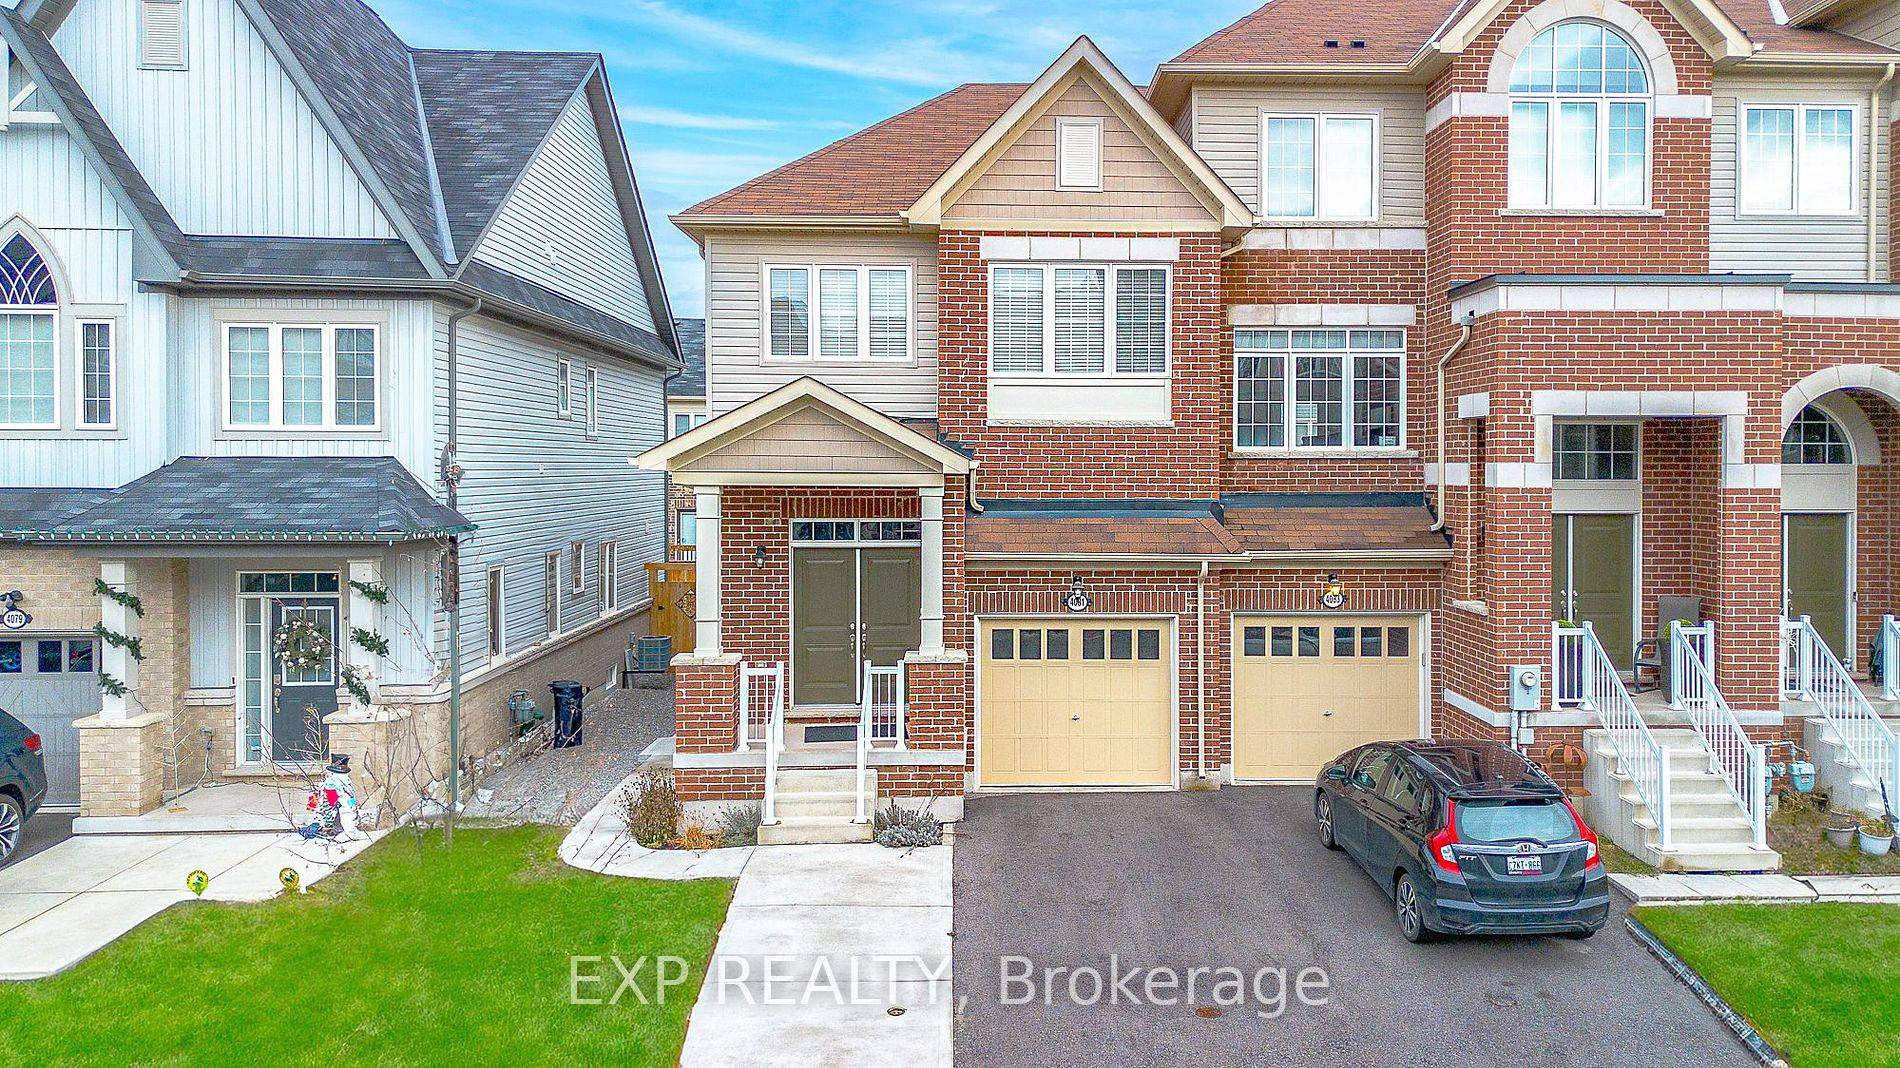 tunning, 3 1 bedroom, 3. 5 bathroom end unit townhome at 4081 Canby Street in Beamsville.